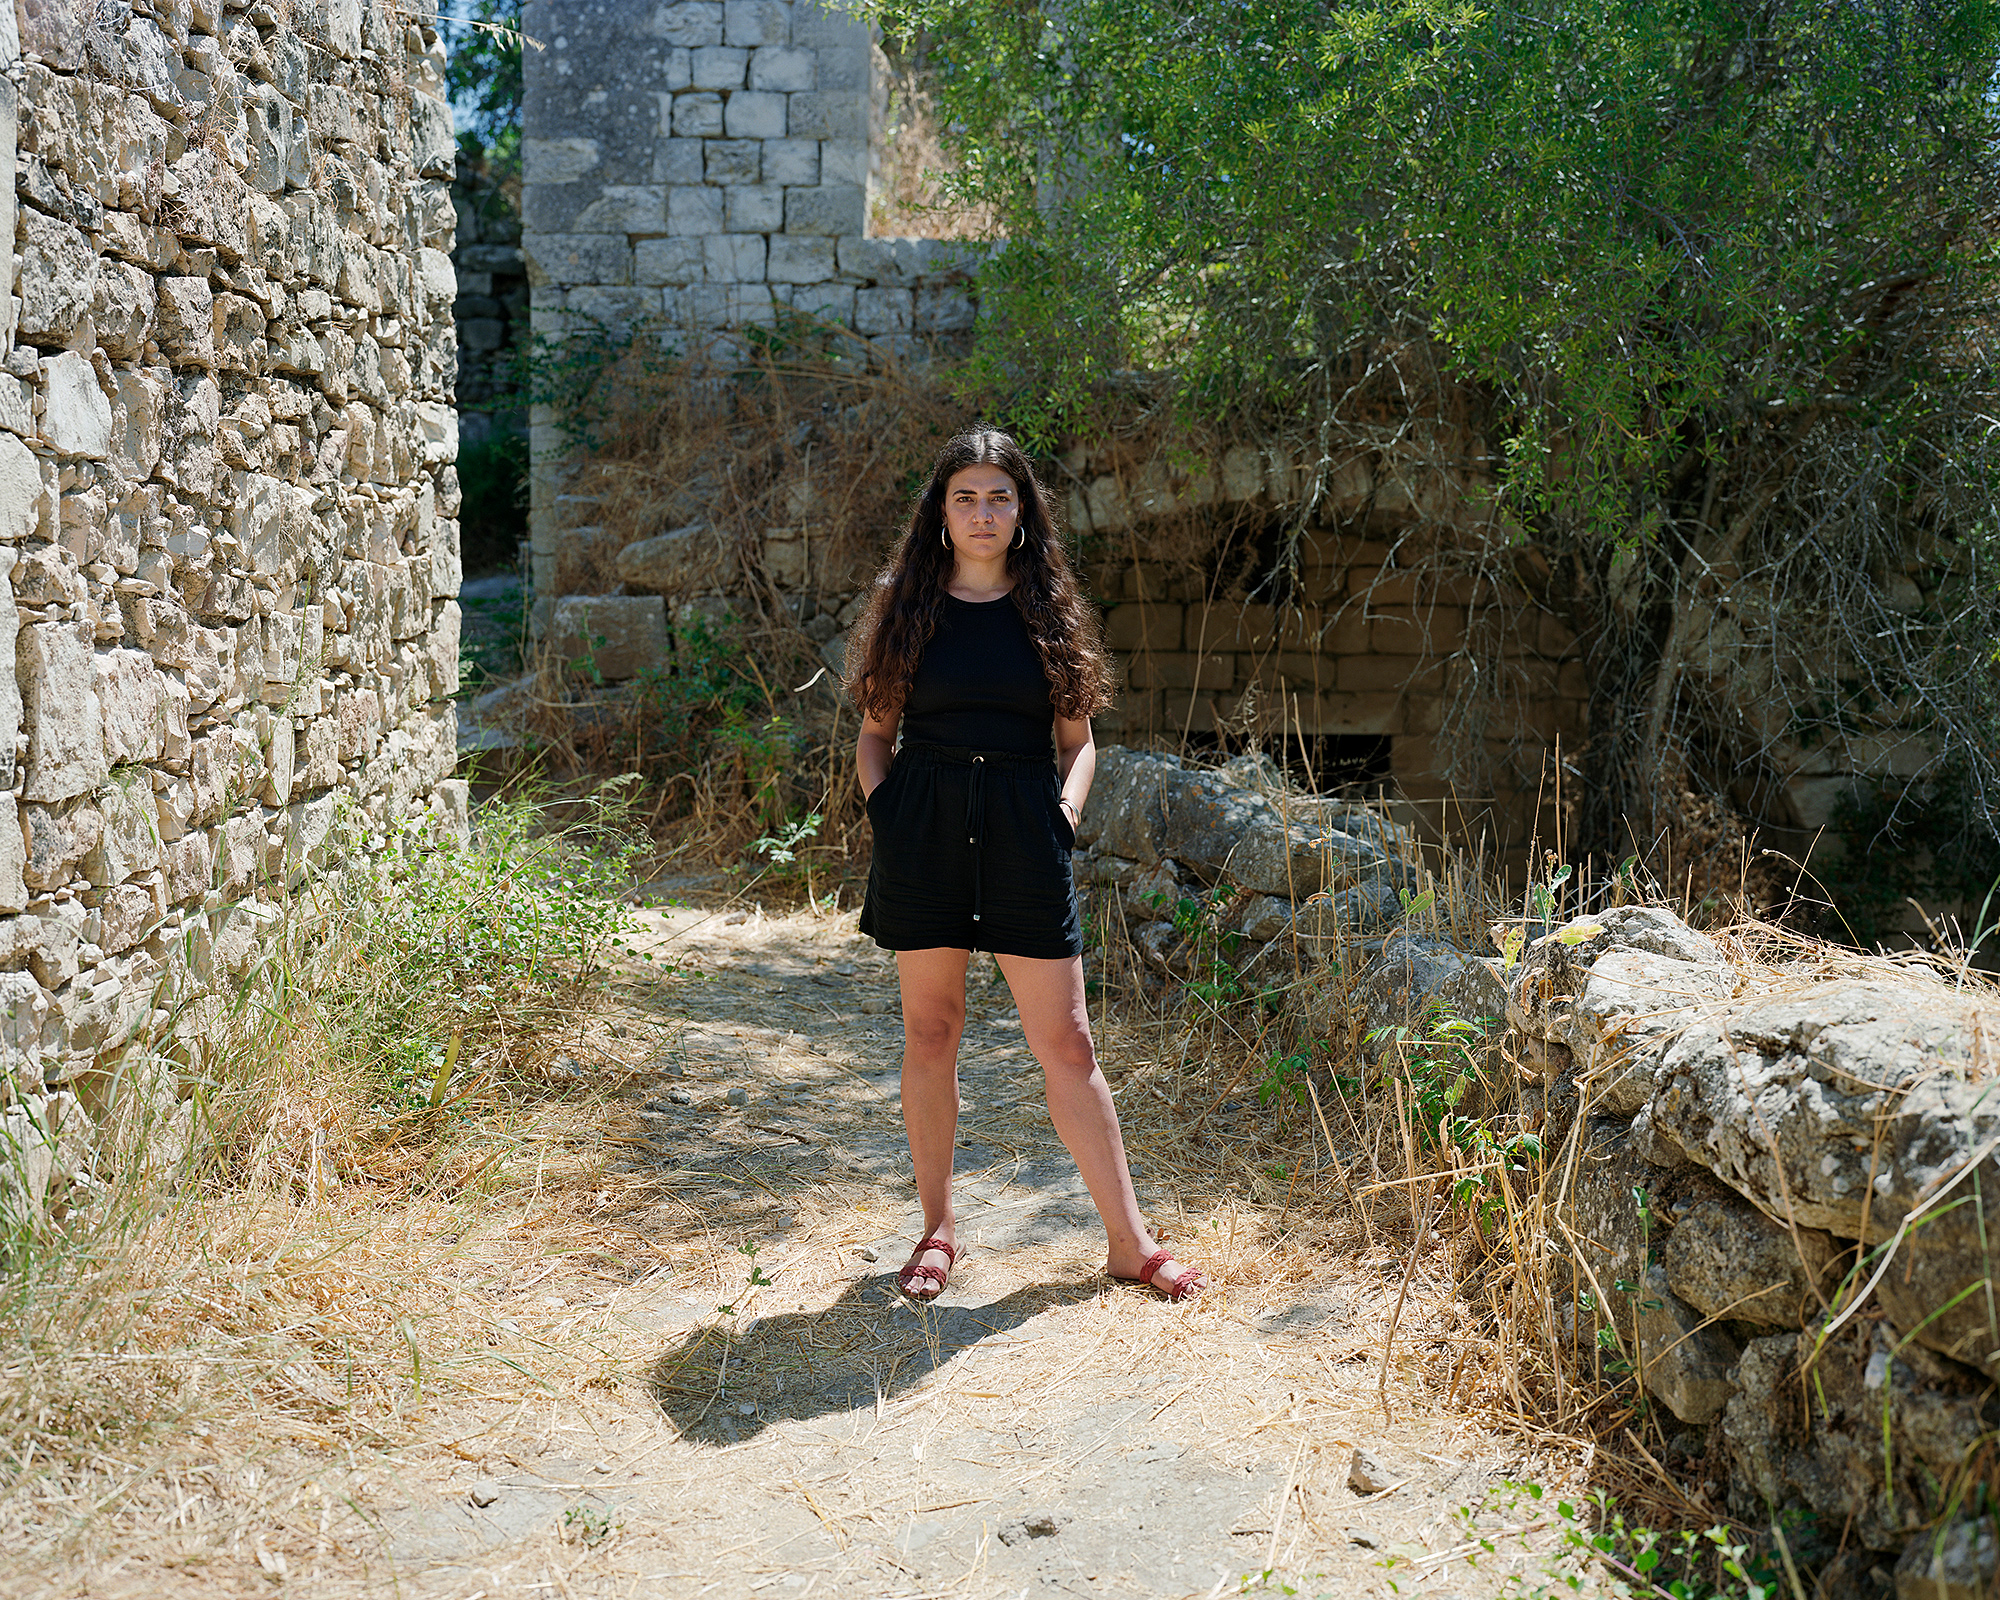 Young woman standing on dirt path among abandoned stone houses